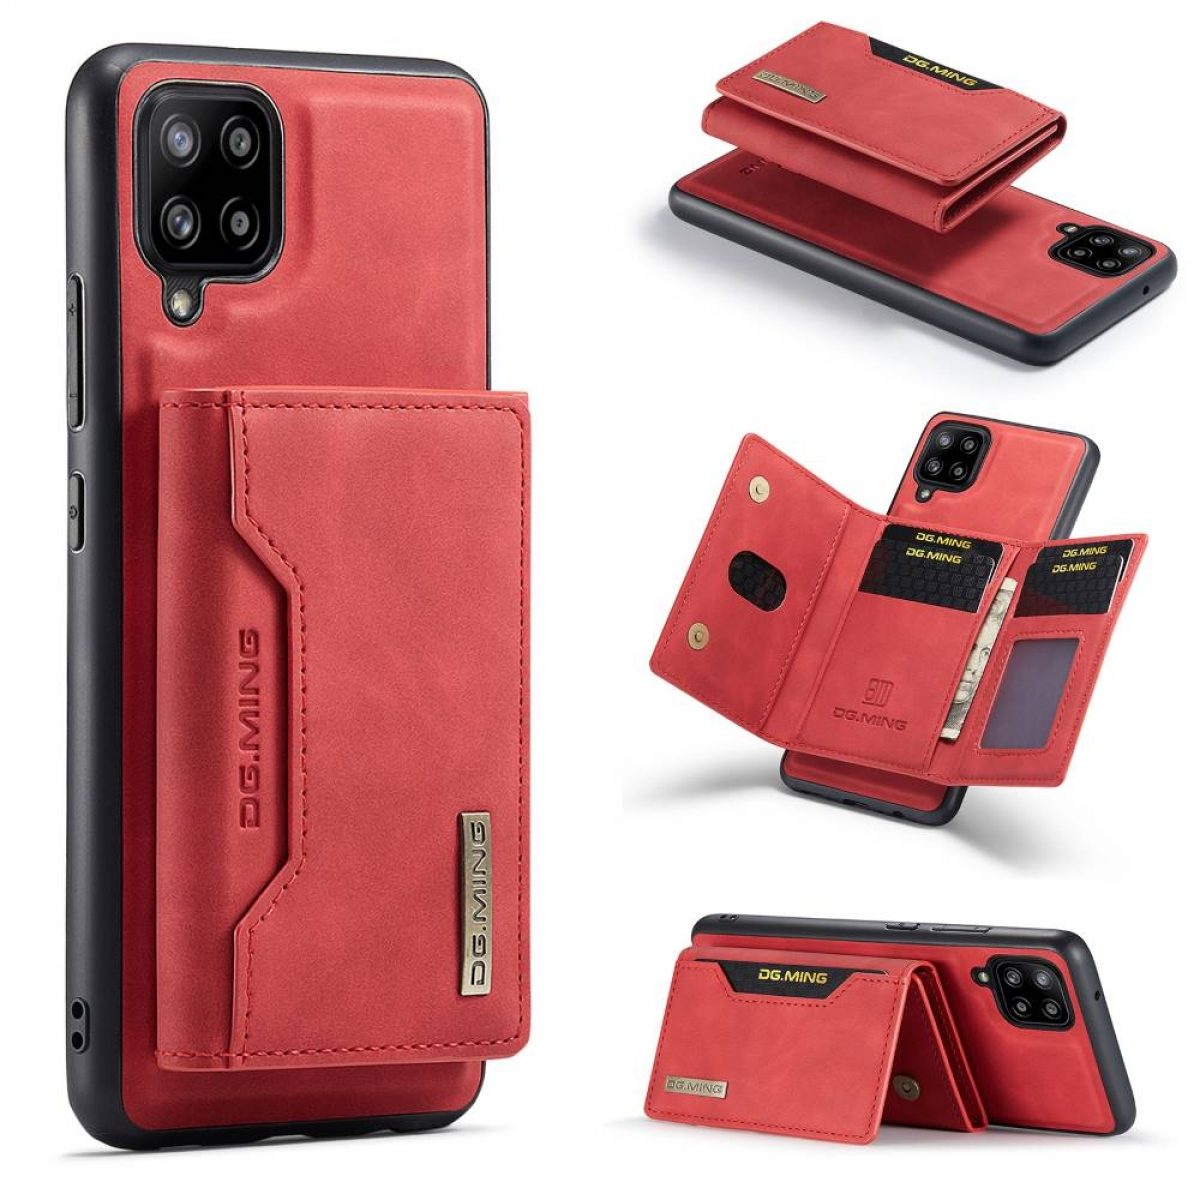 DG Samsung, Backcover, M2 2in1, Rot MING Galaxy A42,